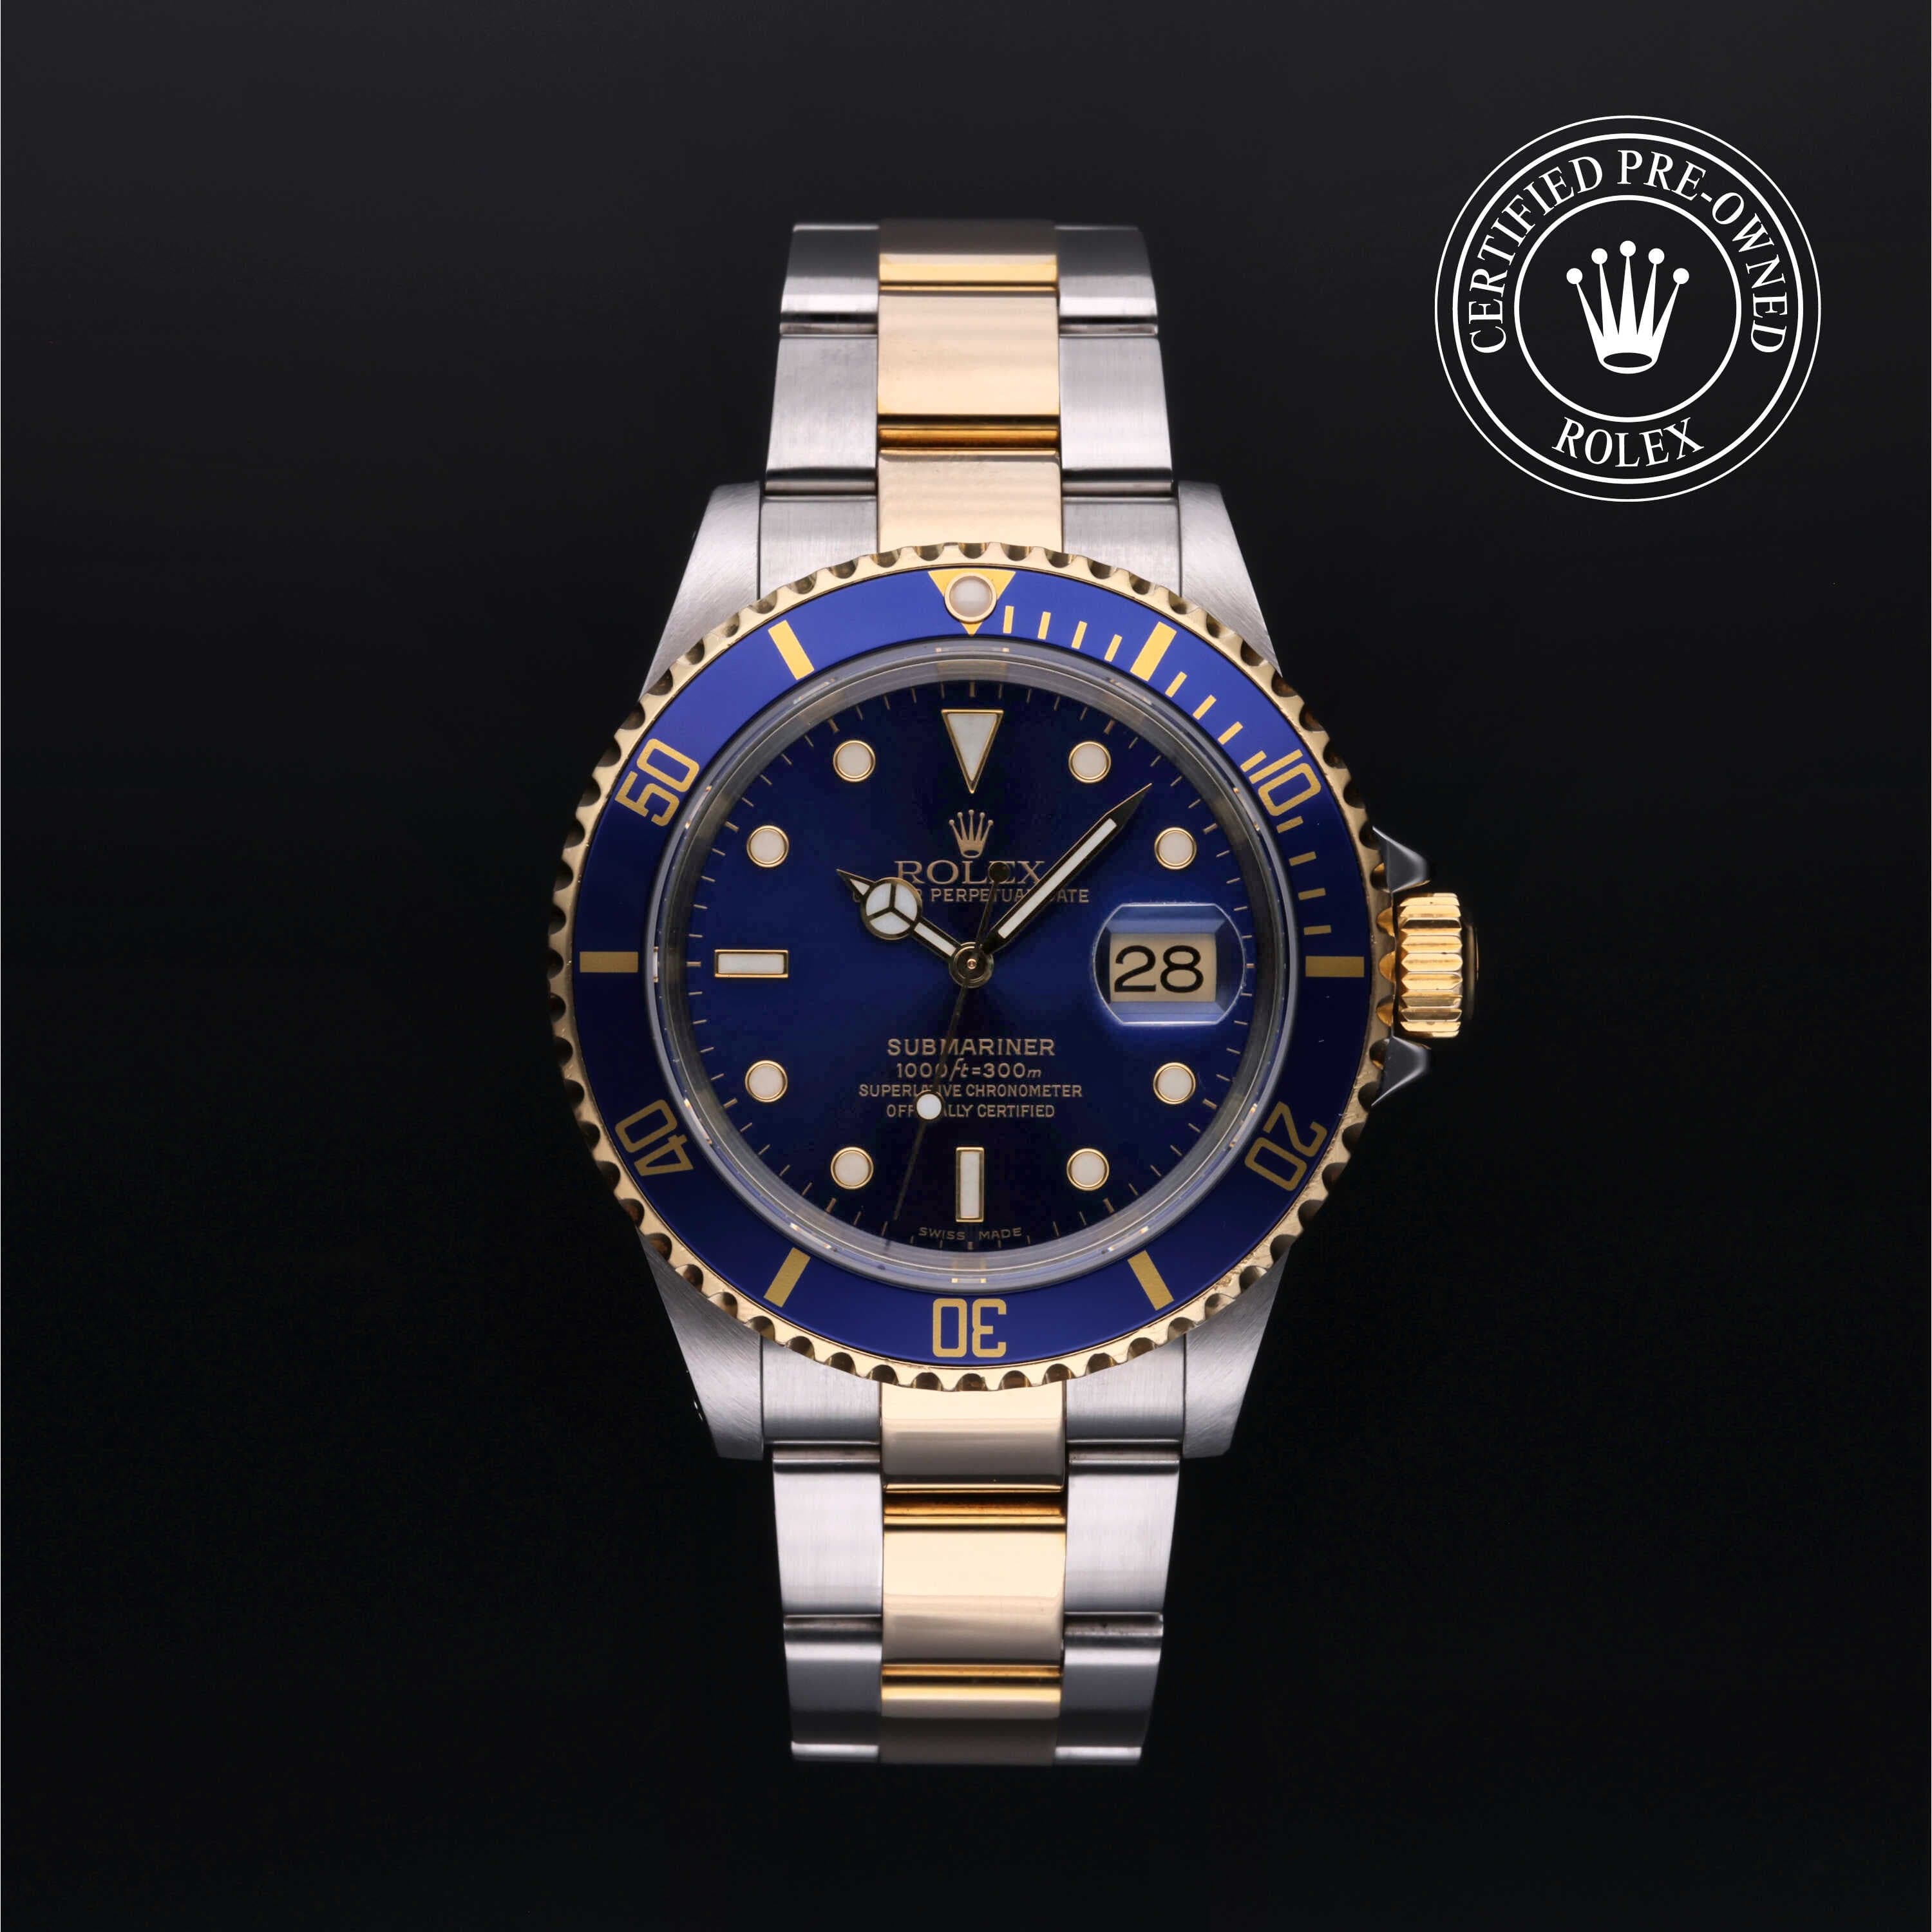 Rolex Certified Pre-Owned Submariner in Oyster, 40 mm, Stainless Steel and yellow gold watch